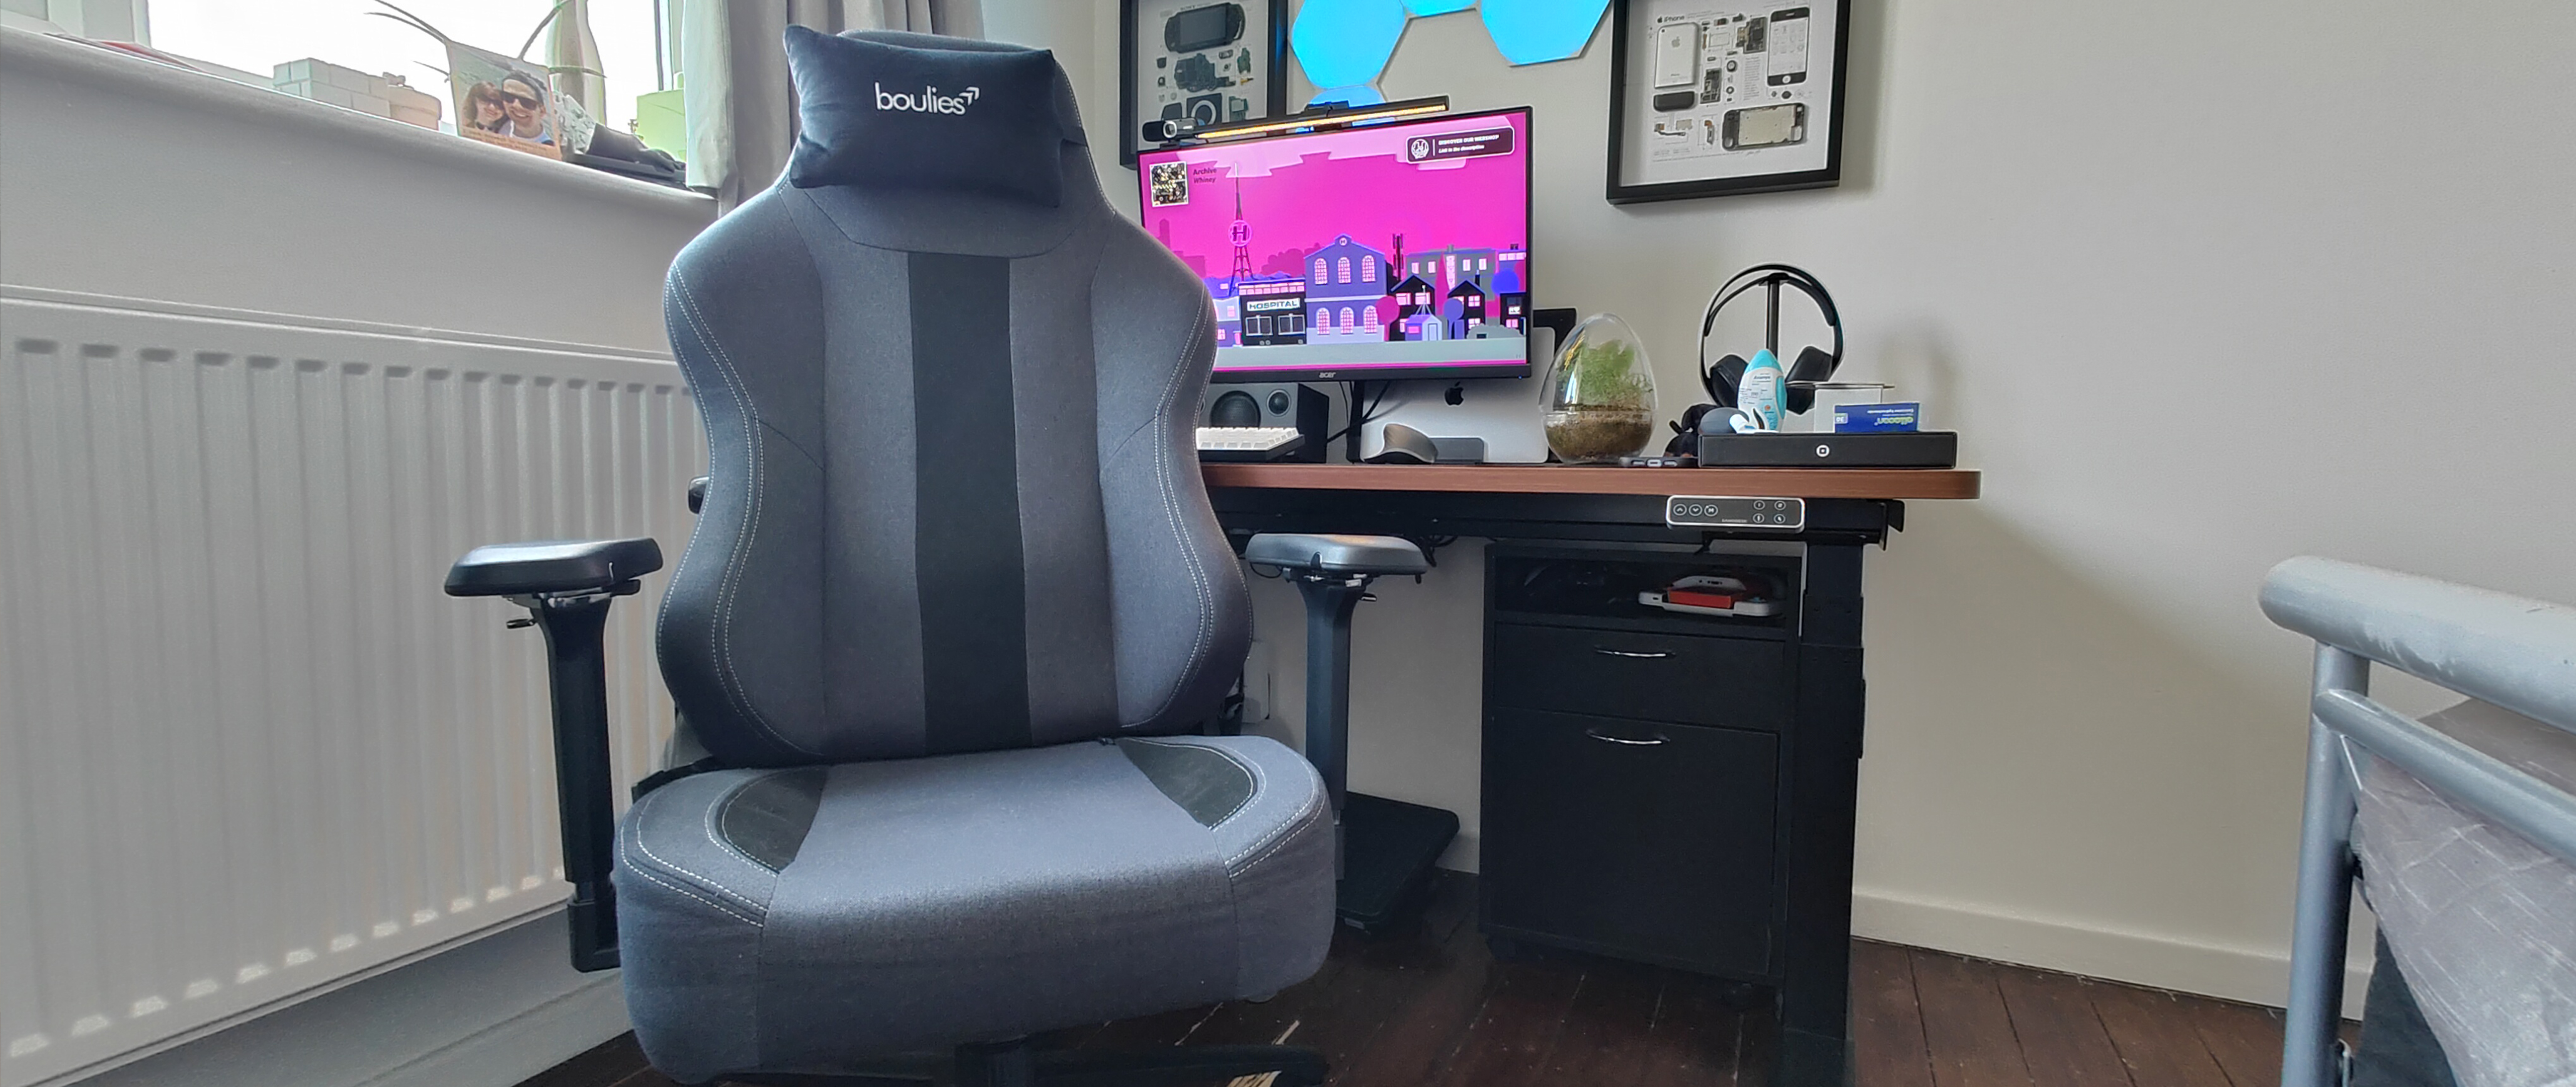 Boulies Master Series Computer Chair review: The best gaming chair for short  kings and queens | Laptop Mag